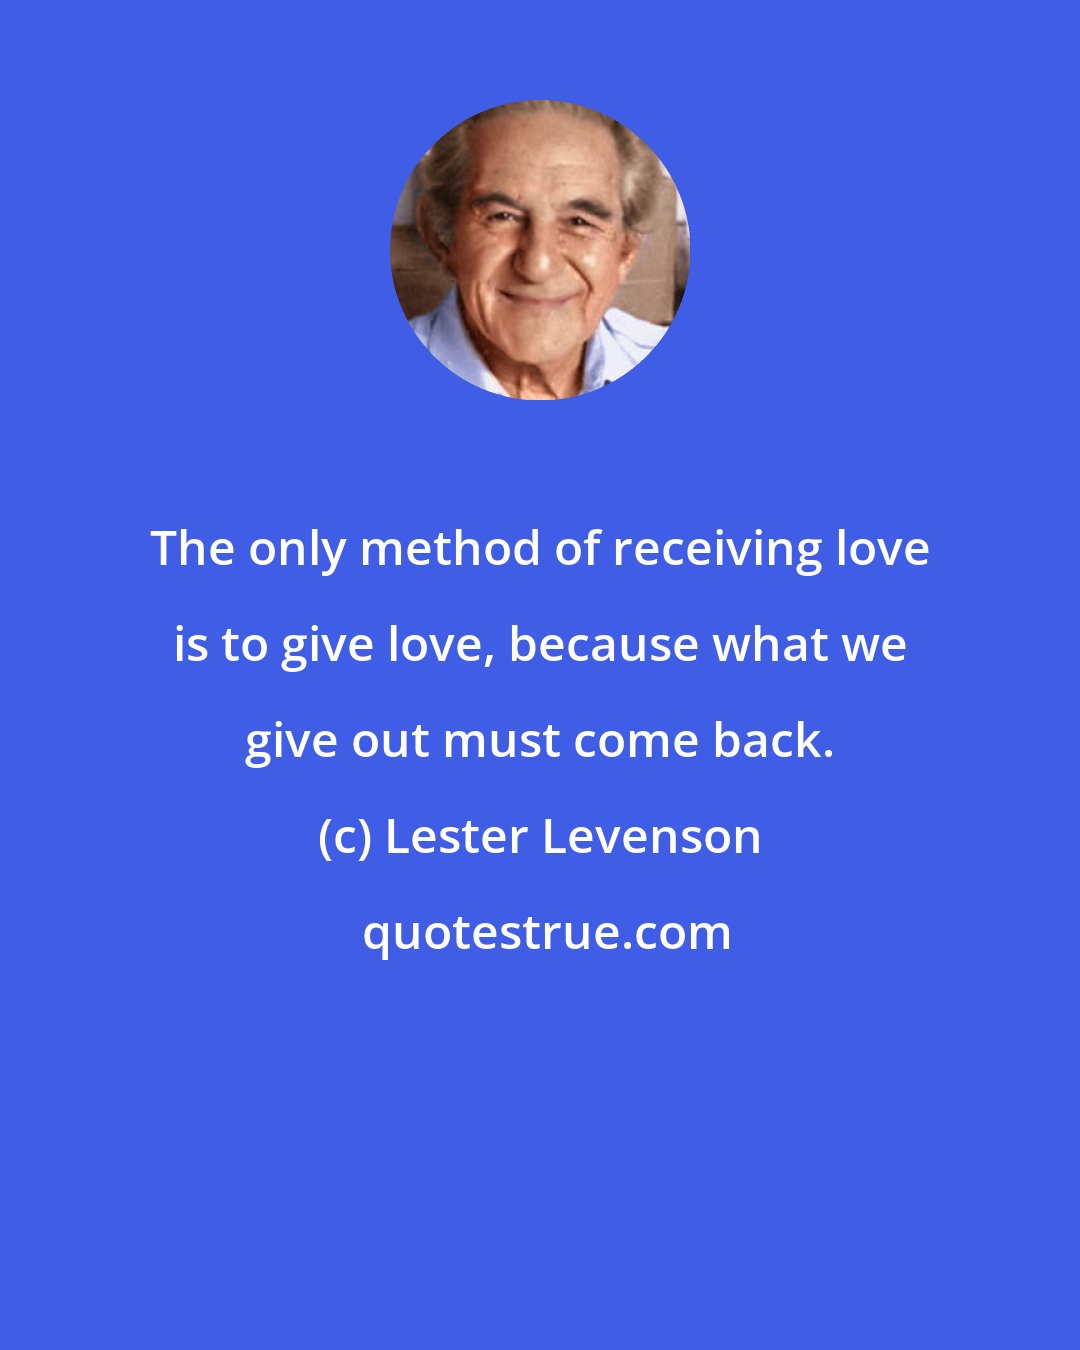 Lester Levenson: The only method of receiving love is to give love, because what we give out must come back.